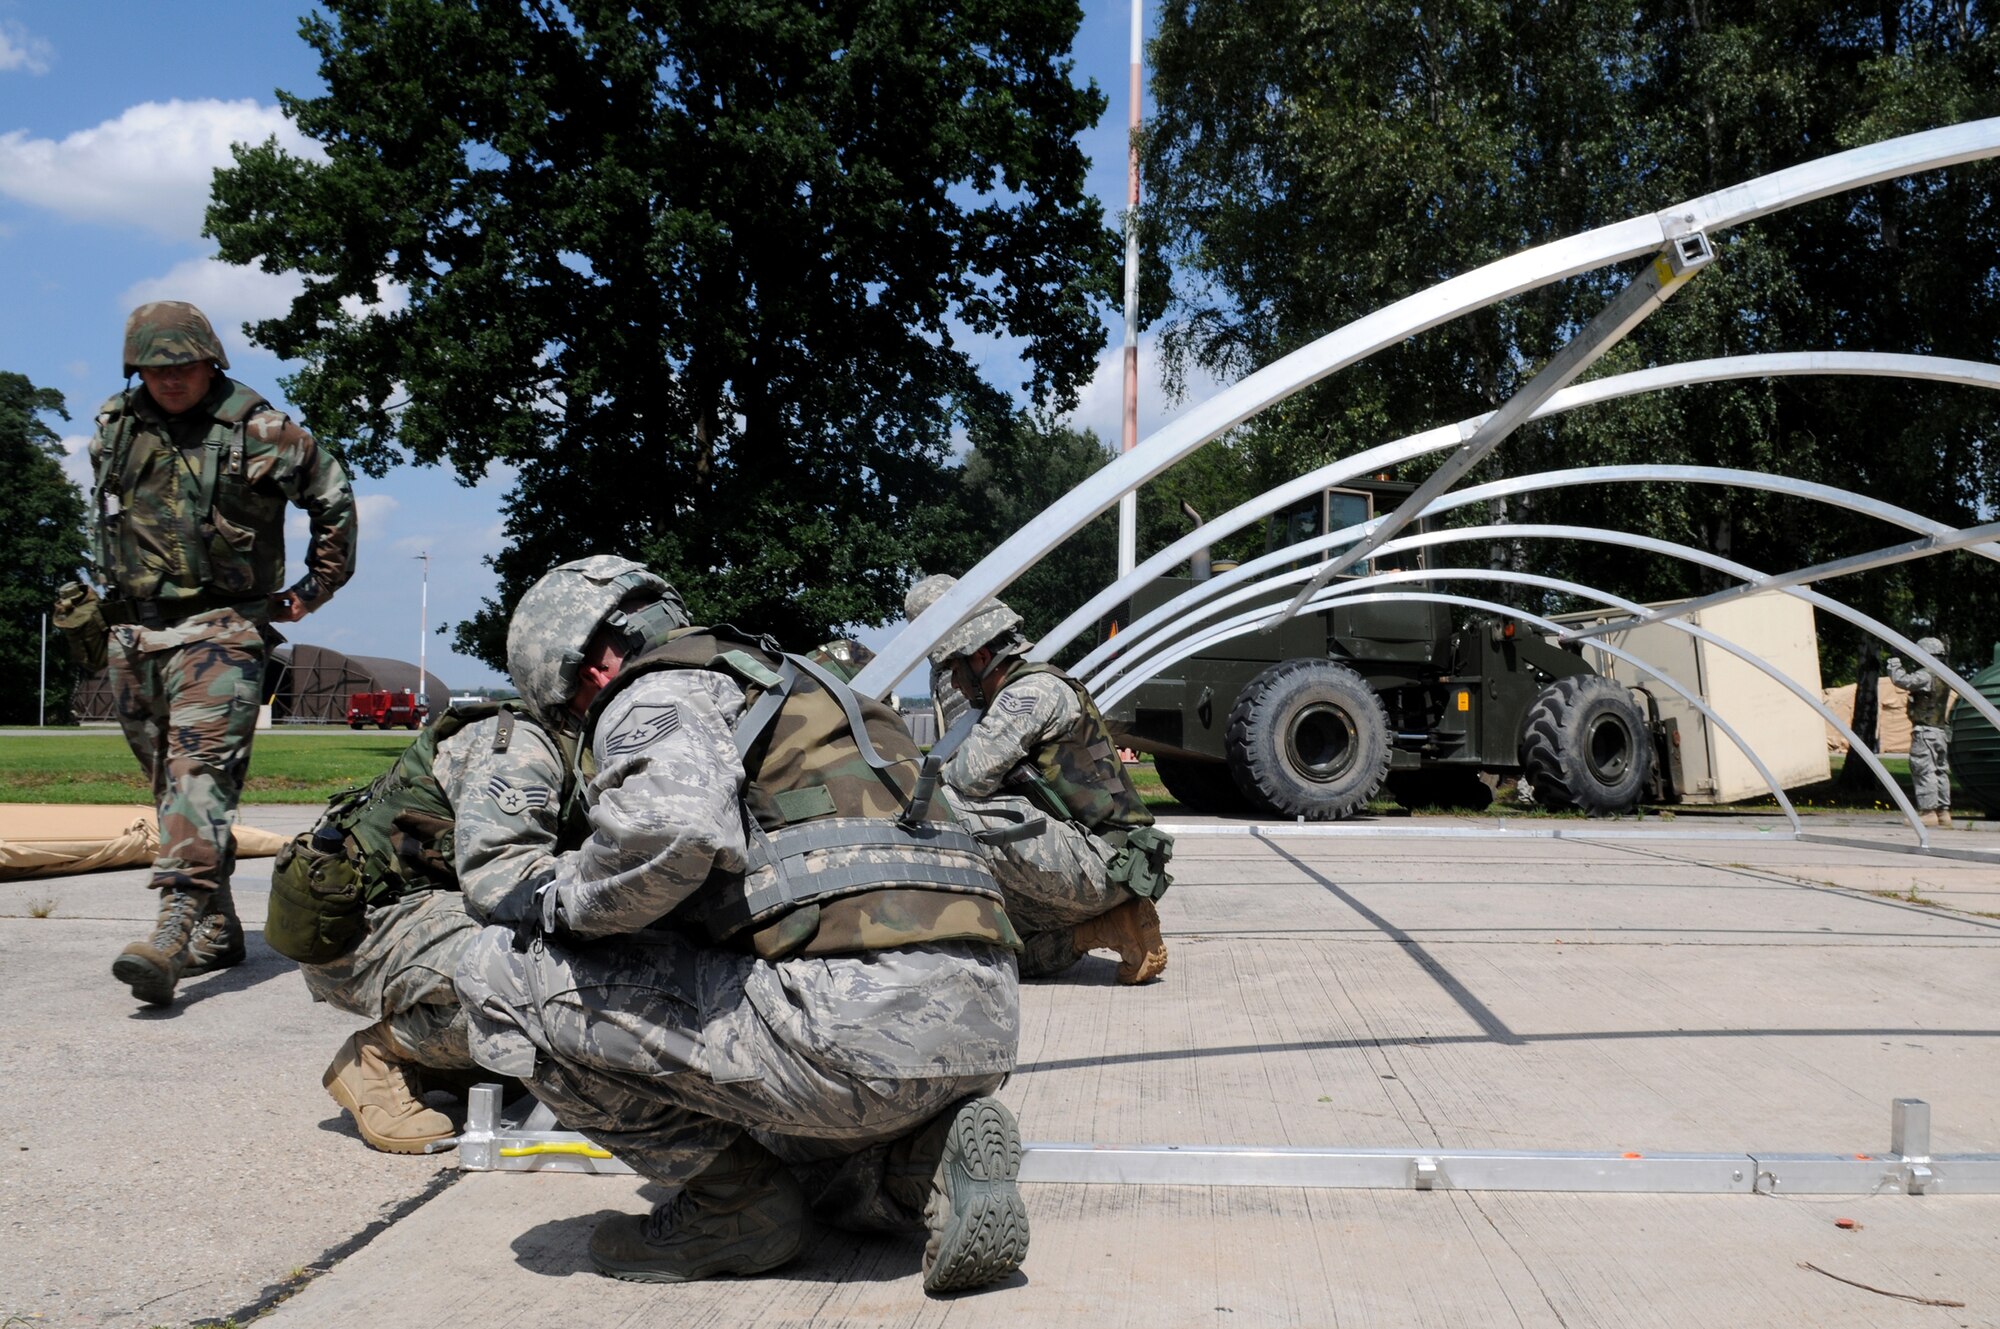 U.S. Air Force Airmen of different bases, wings, and squadrons work together to build a small shelter system tent during the Silver Flag exercise on Ramstein Air Base, Germany, Aug. 1, 2009. There are about nine to ten Silver Flag exercises held throughout the year at the Construction Training Squadron, and the average class size is 100 to 200 people. (U.S. Air Force photo by Airman 1st Class Grovert Fuentes-Contreras)(Released)